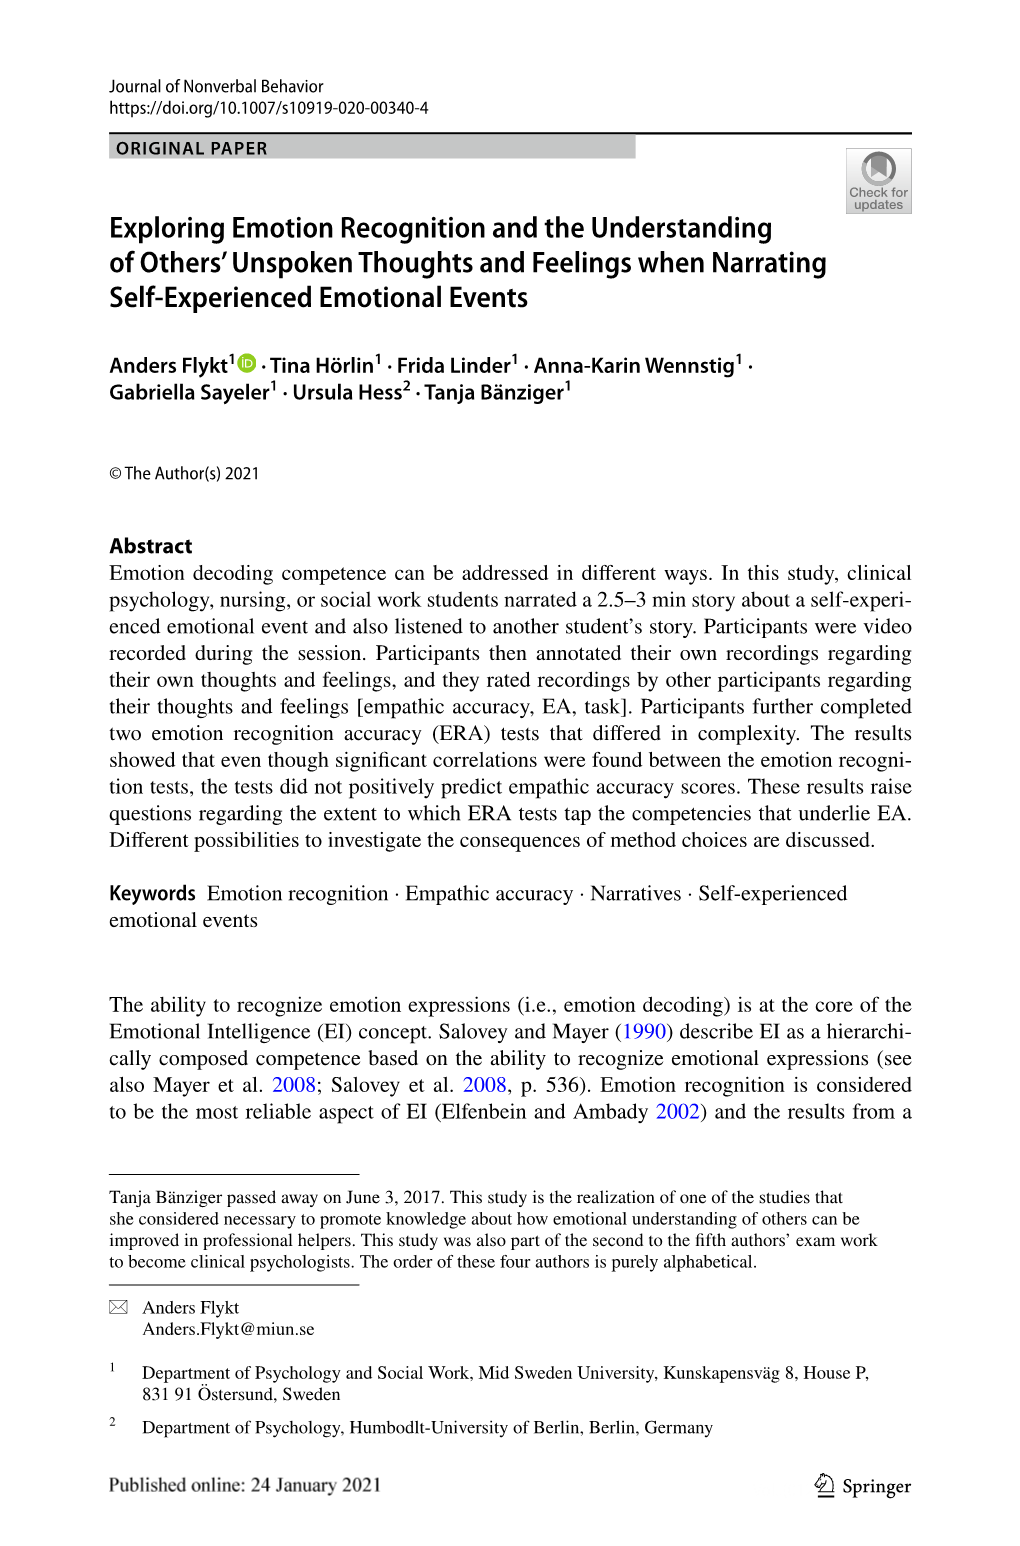 Exploring Emotion Recognition and the Understanding of Others' Unspoken Thoughts and Feelings When Narrating Self-Experienced